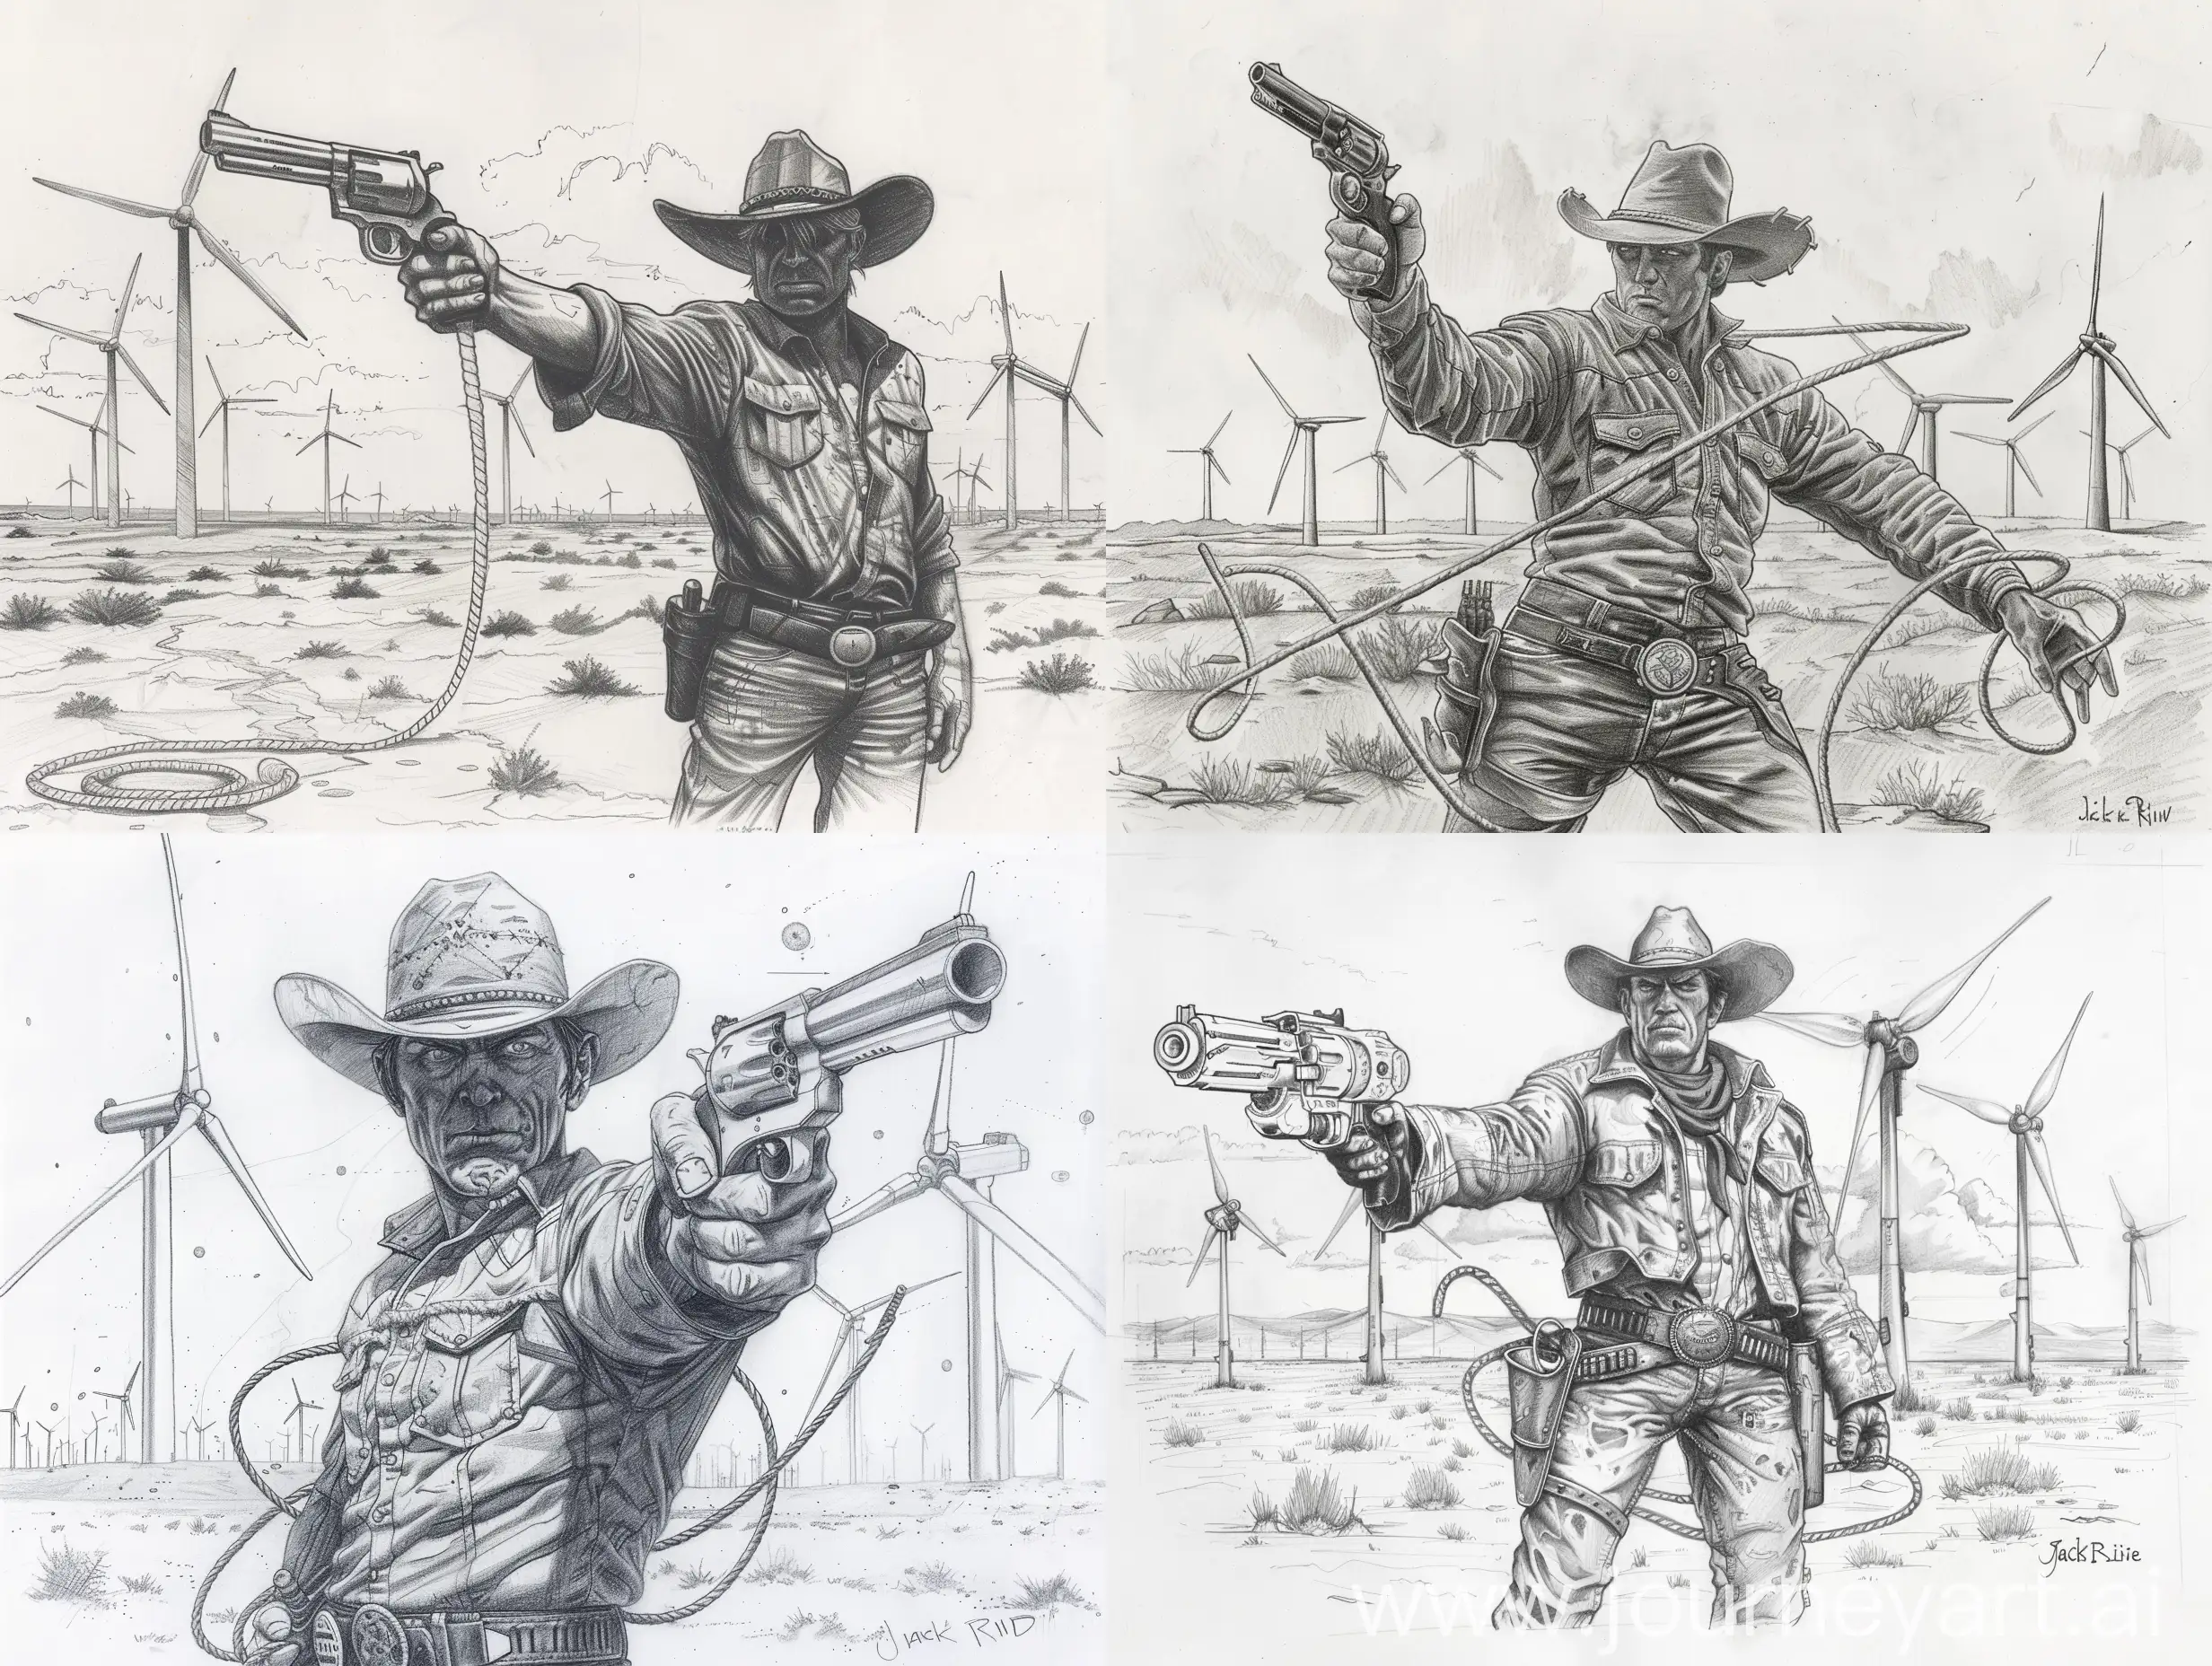 Future-Texas-Lone-Cowboy-Sketch-Jack-Ride-with-Coiled-Lasso-and-Holographic-Gun